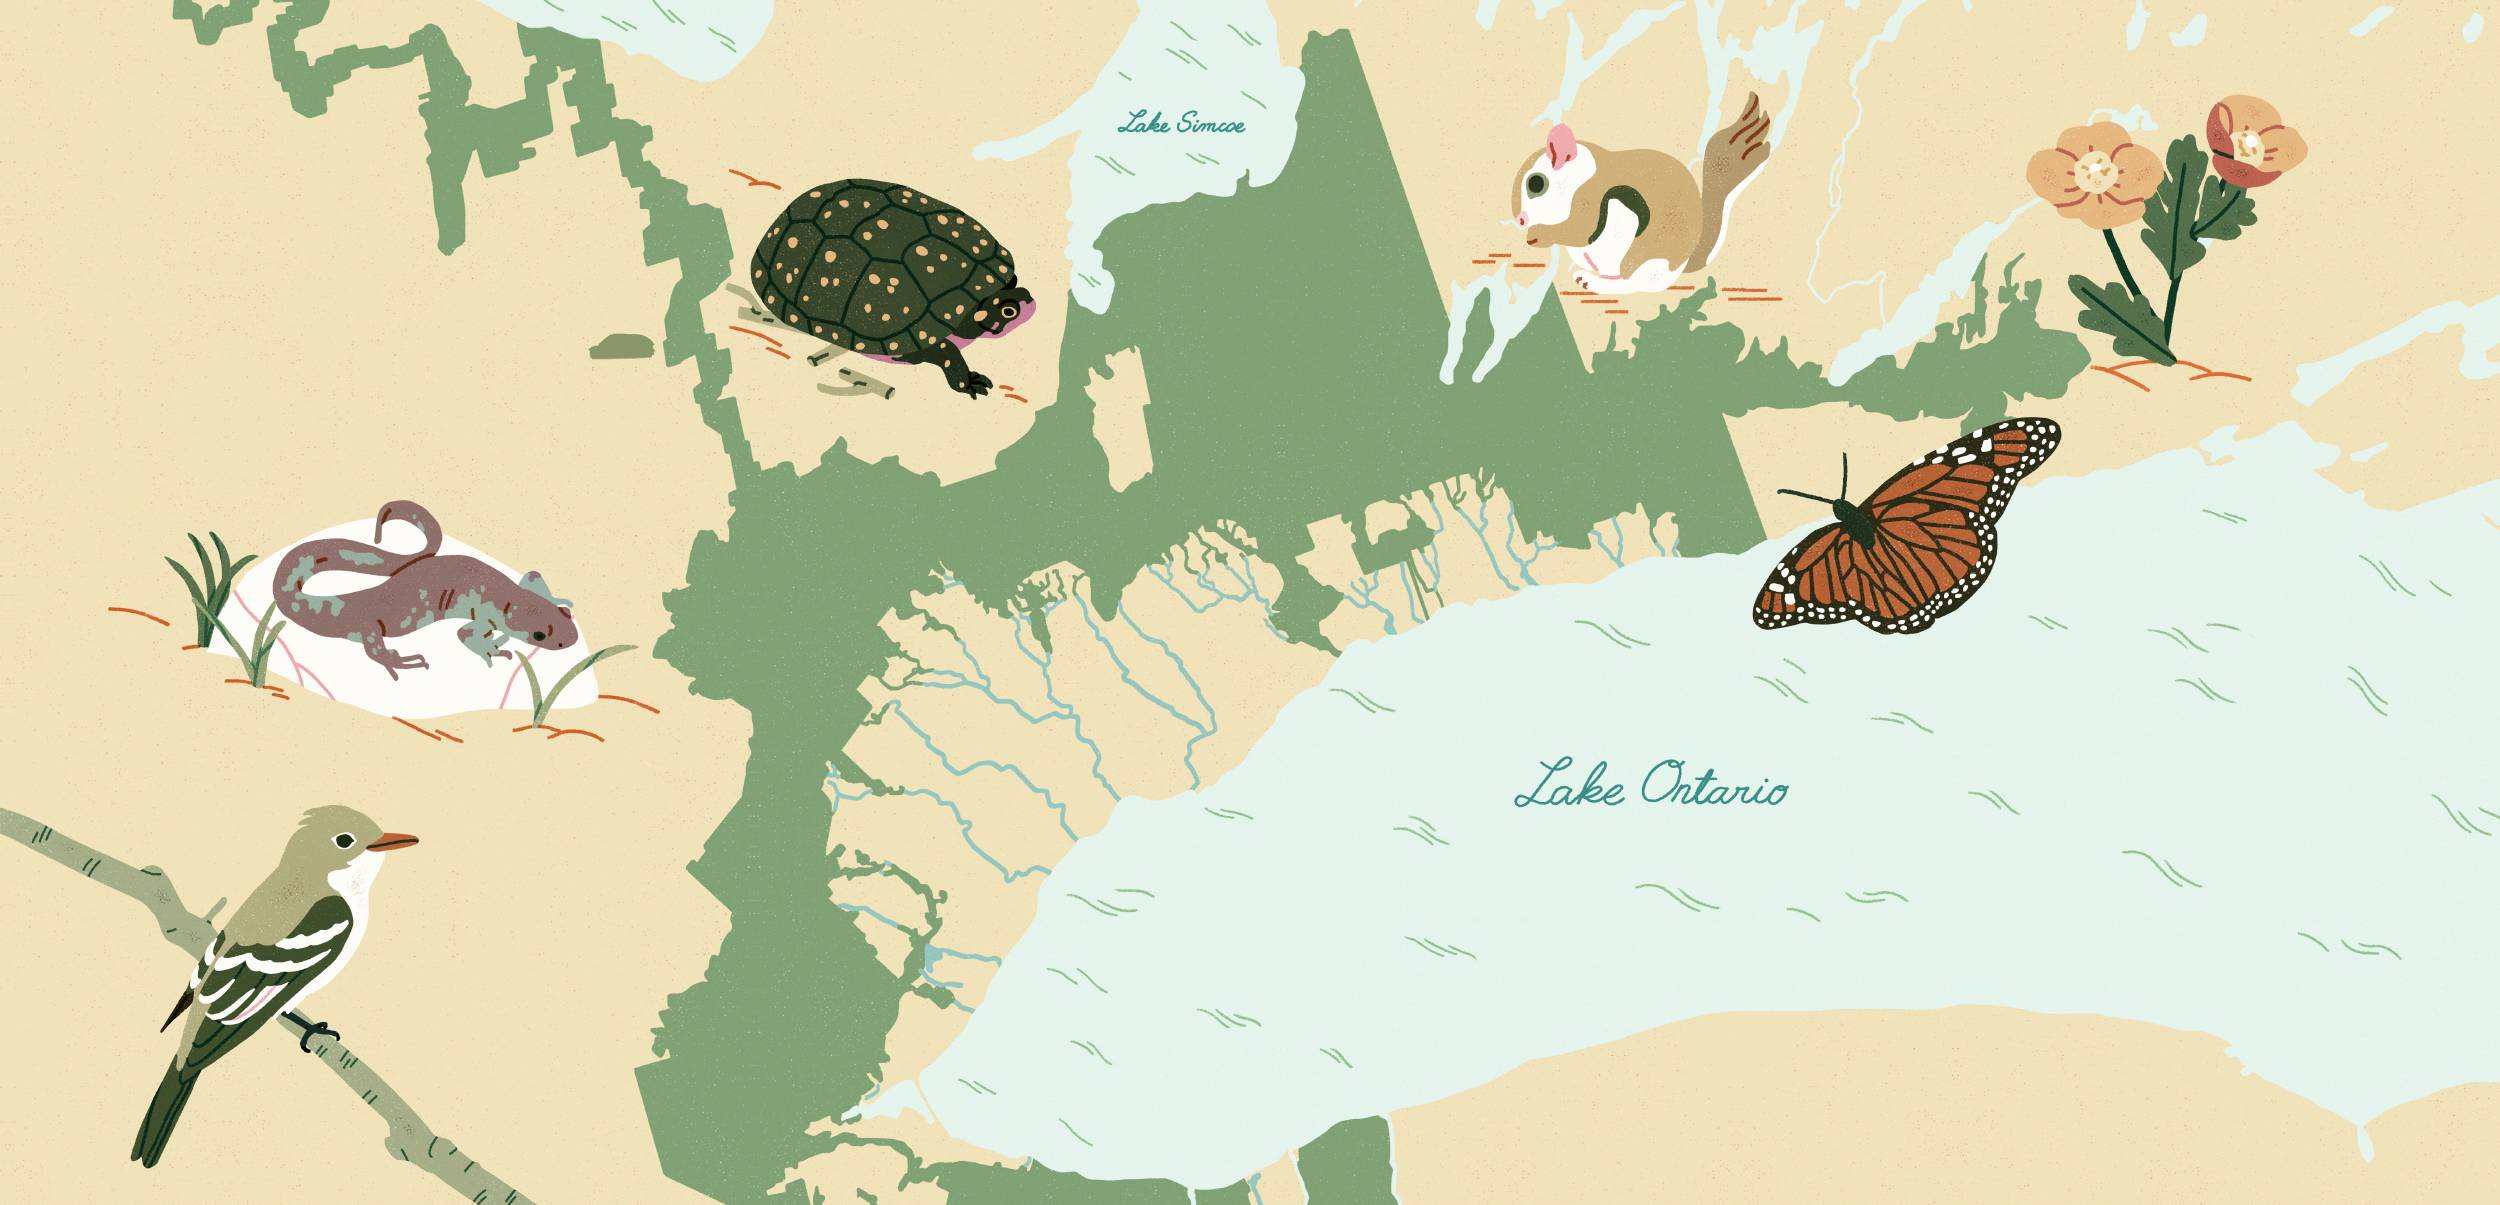 An illustrated image of Ontario’s Greenbelt with animals and plants